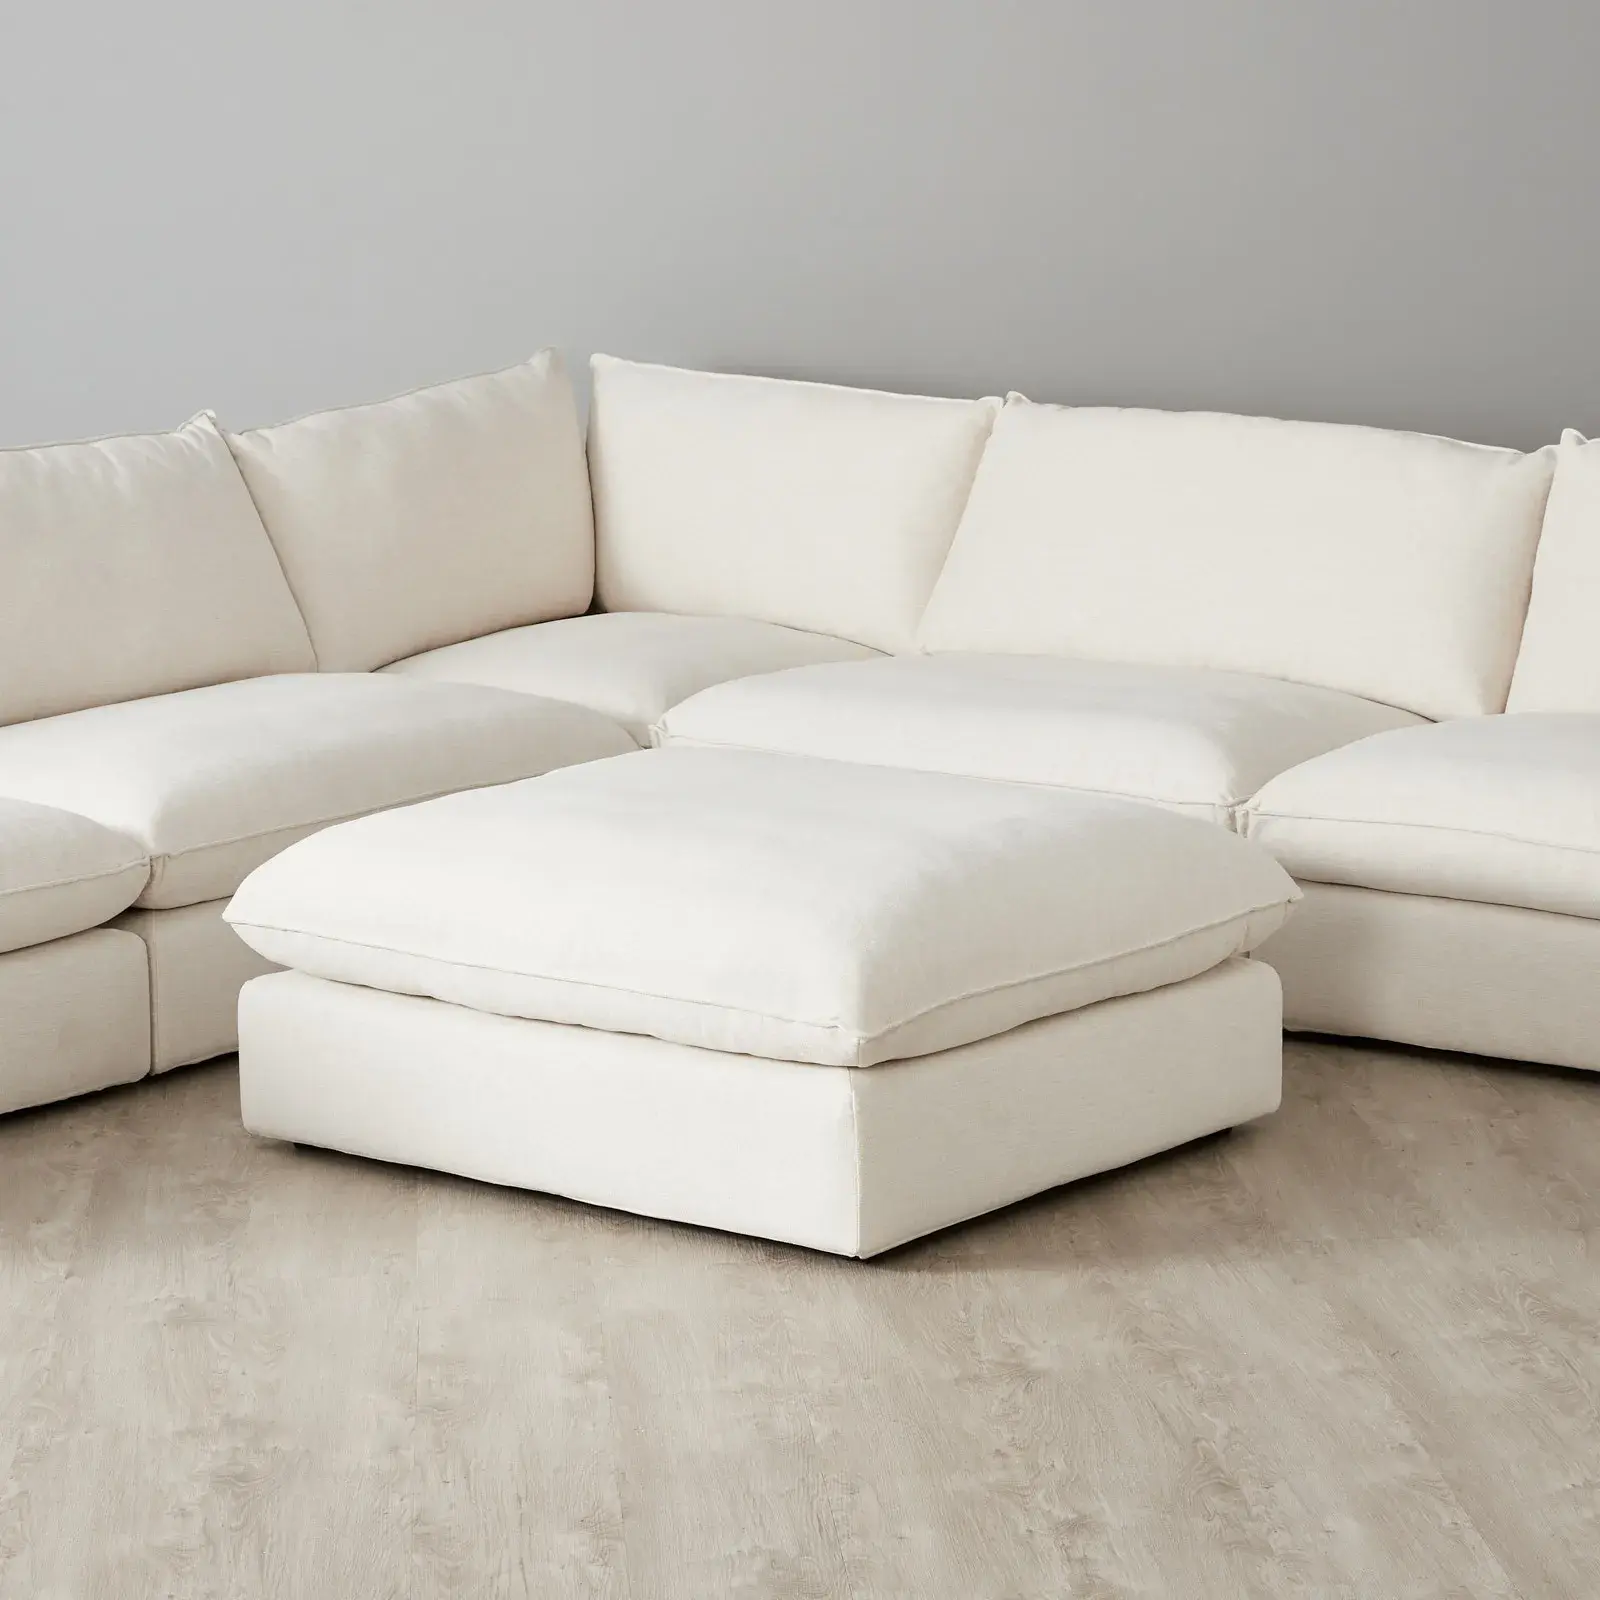 Finding The Perfect Comfortable Sofa for Your Home: A Complete Guide